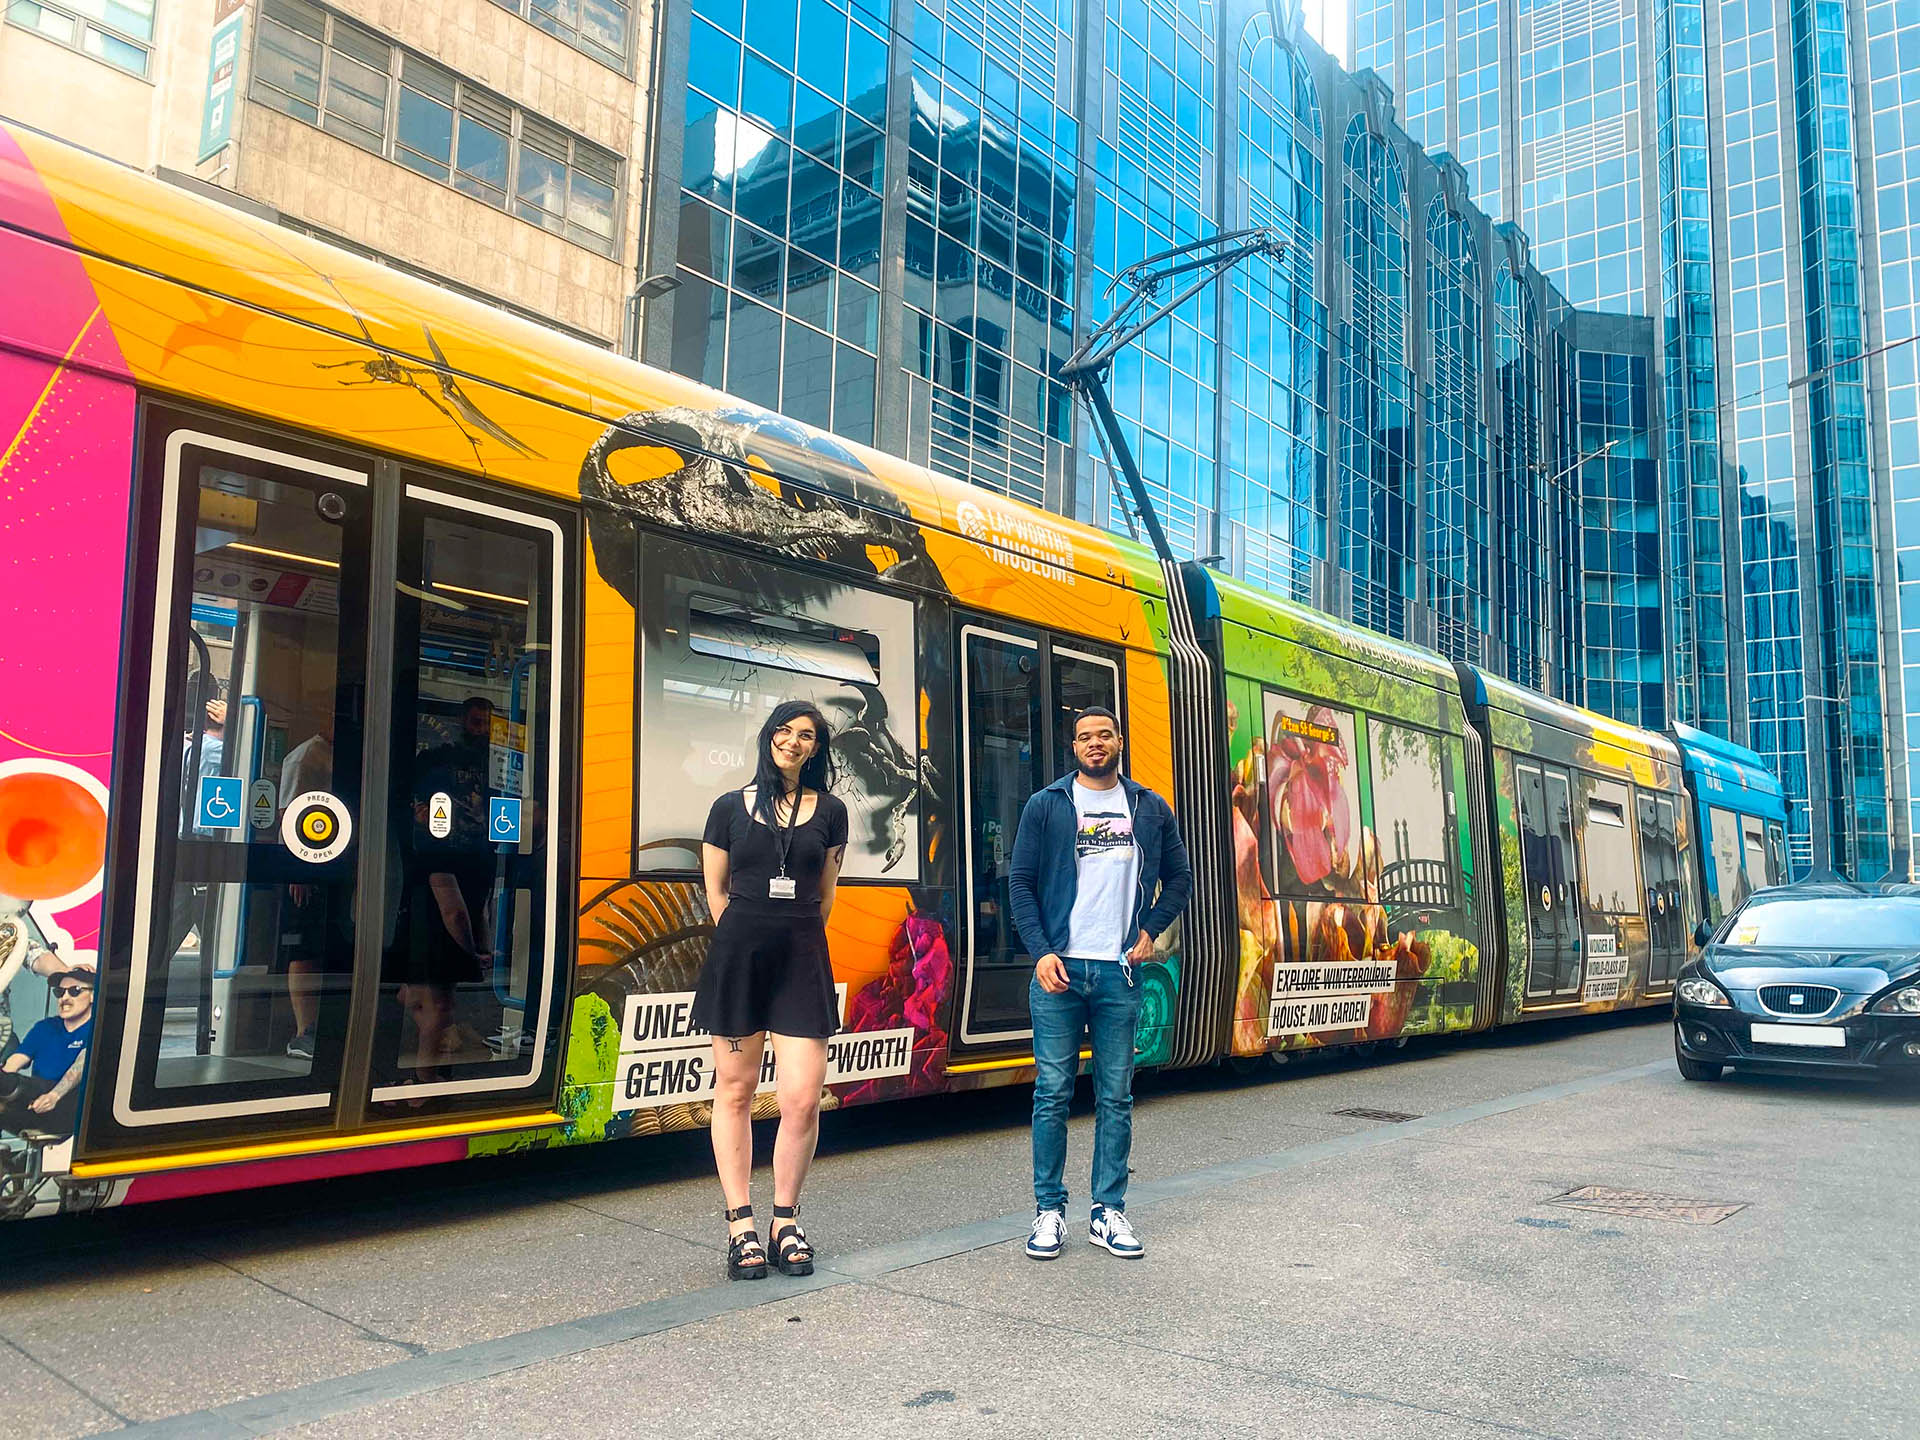 Designers Adriana (left) and Armani (right) in front of the tram wrap they designed during the 2022 Birmingham Commonwealth Games to promote the cultural attractions of the University of Birmingham.